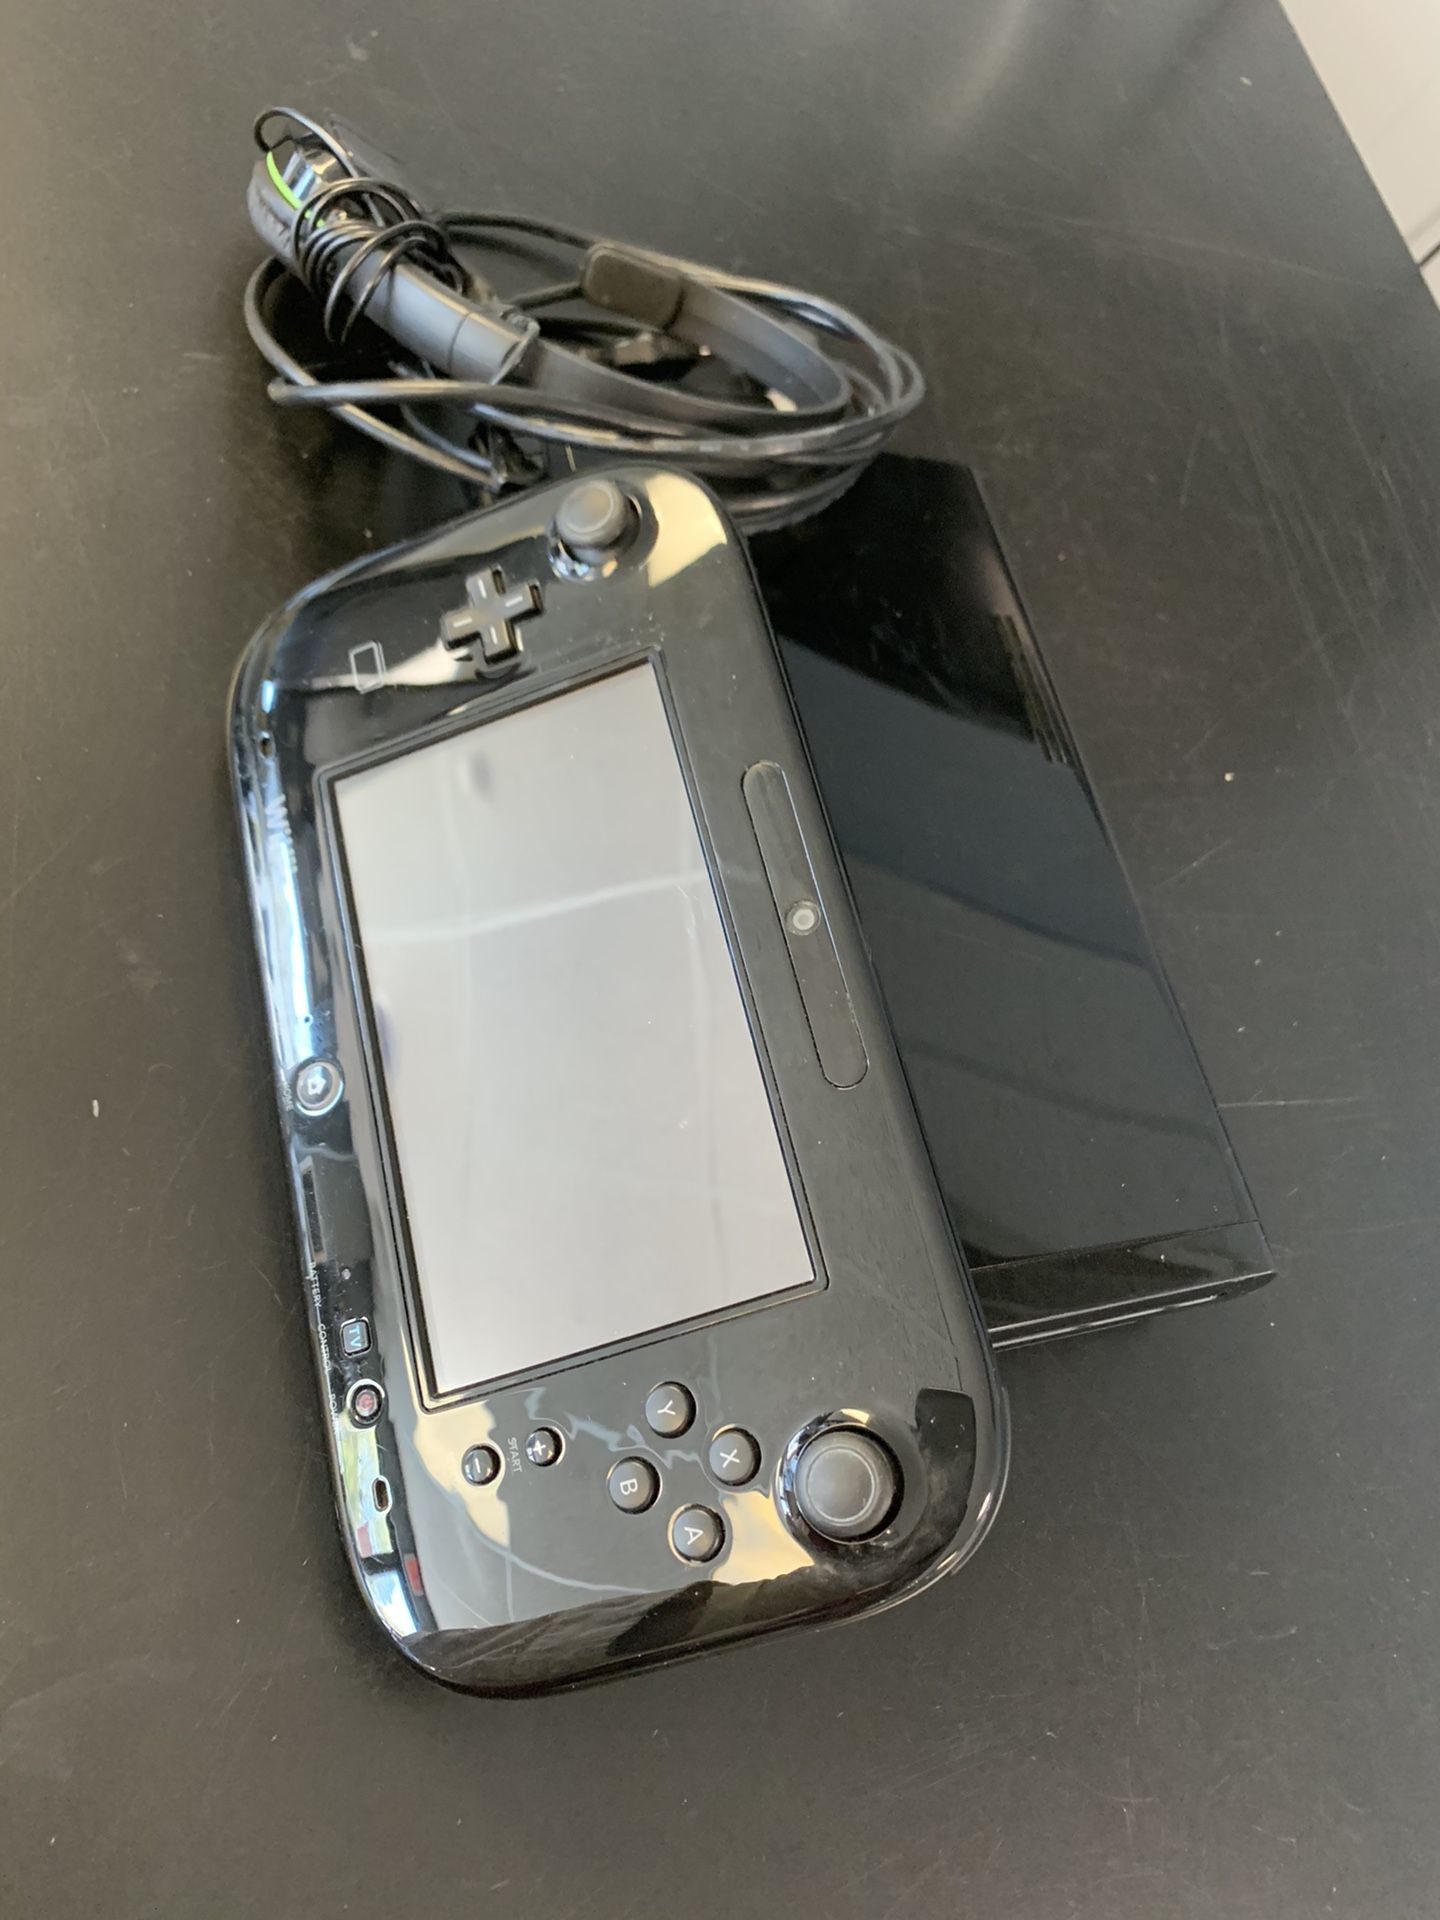 Nintendo Wii U — I have 2 games for sale on profile extra $20